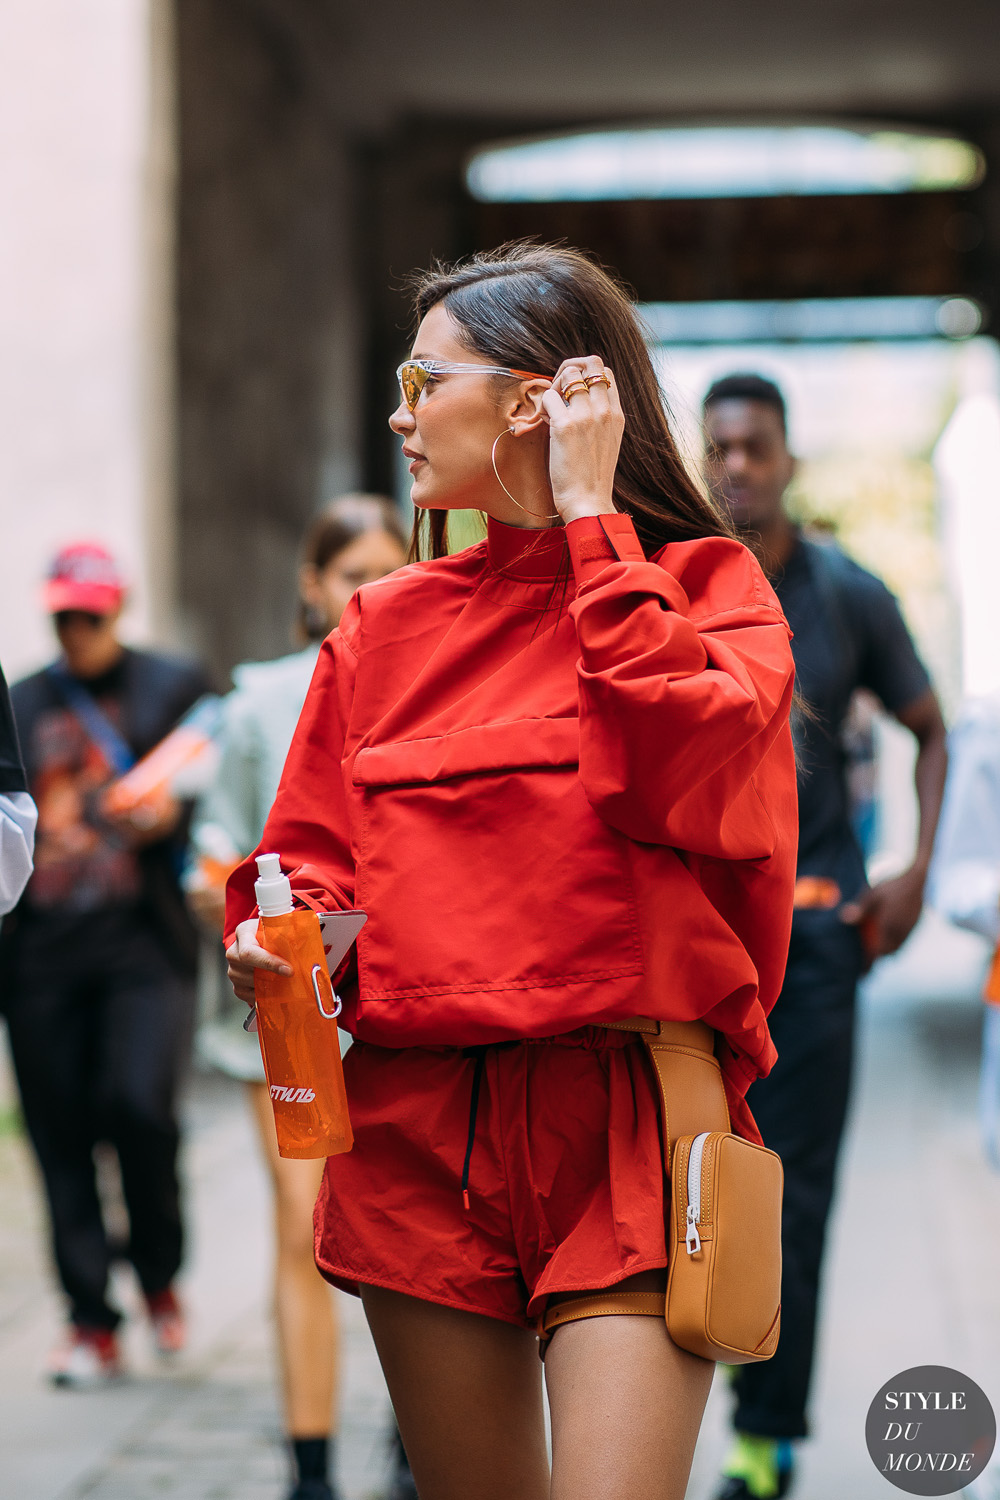 tendencia-athleisure-Bella-Hadid-by-STYLEDUMONDE-Street-Style-Fashion-Photography20180621_48A4344